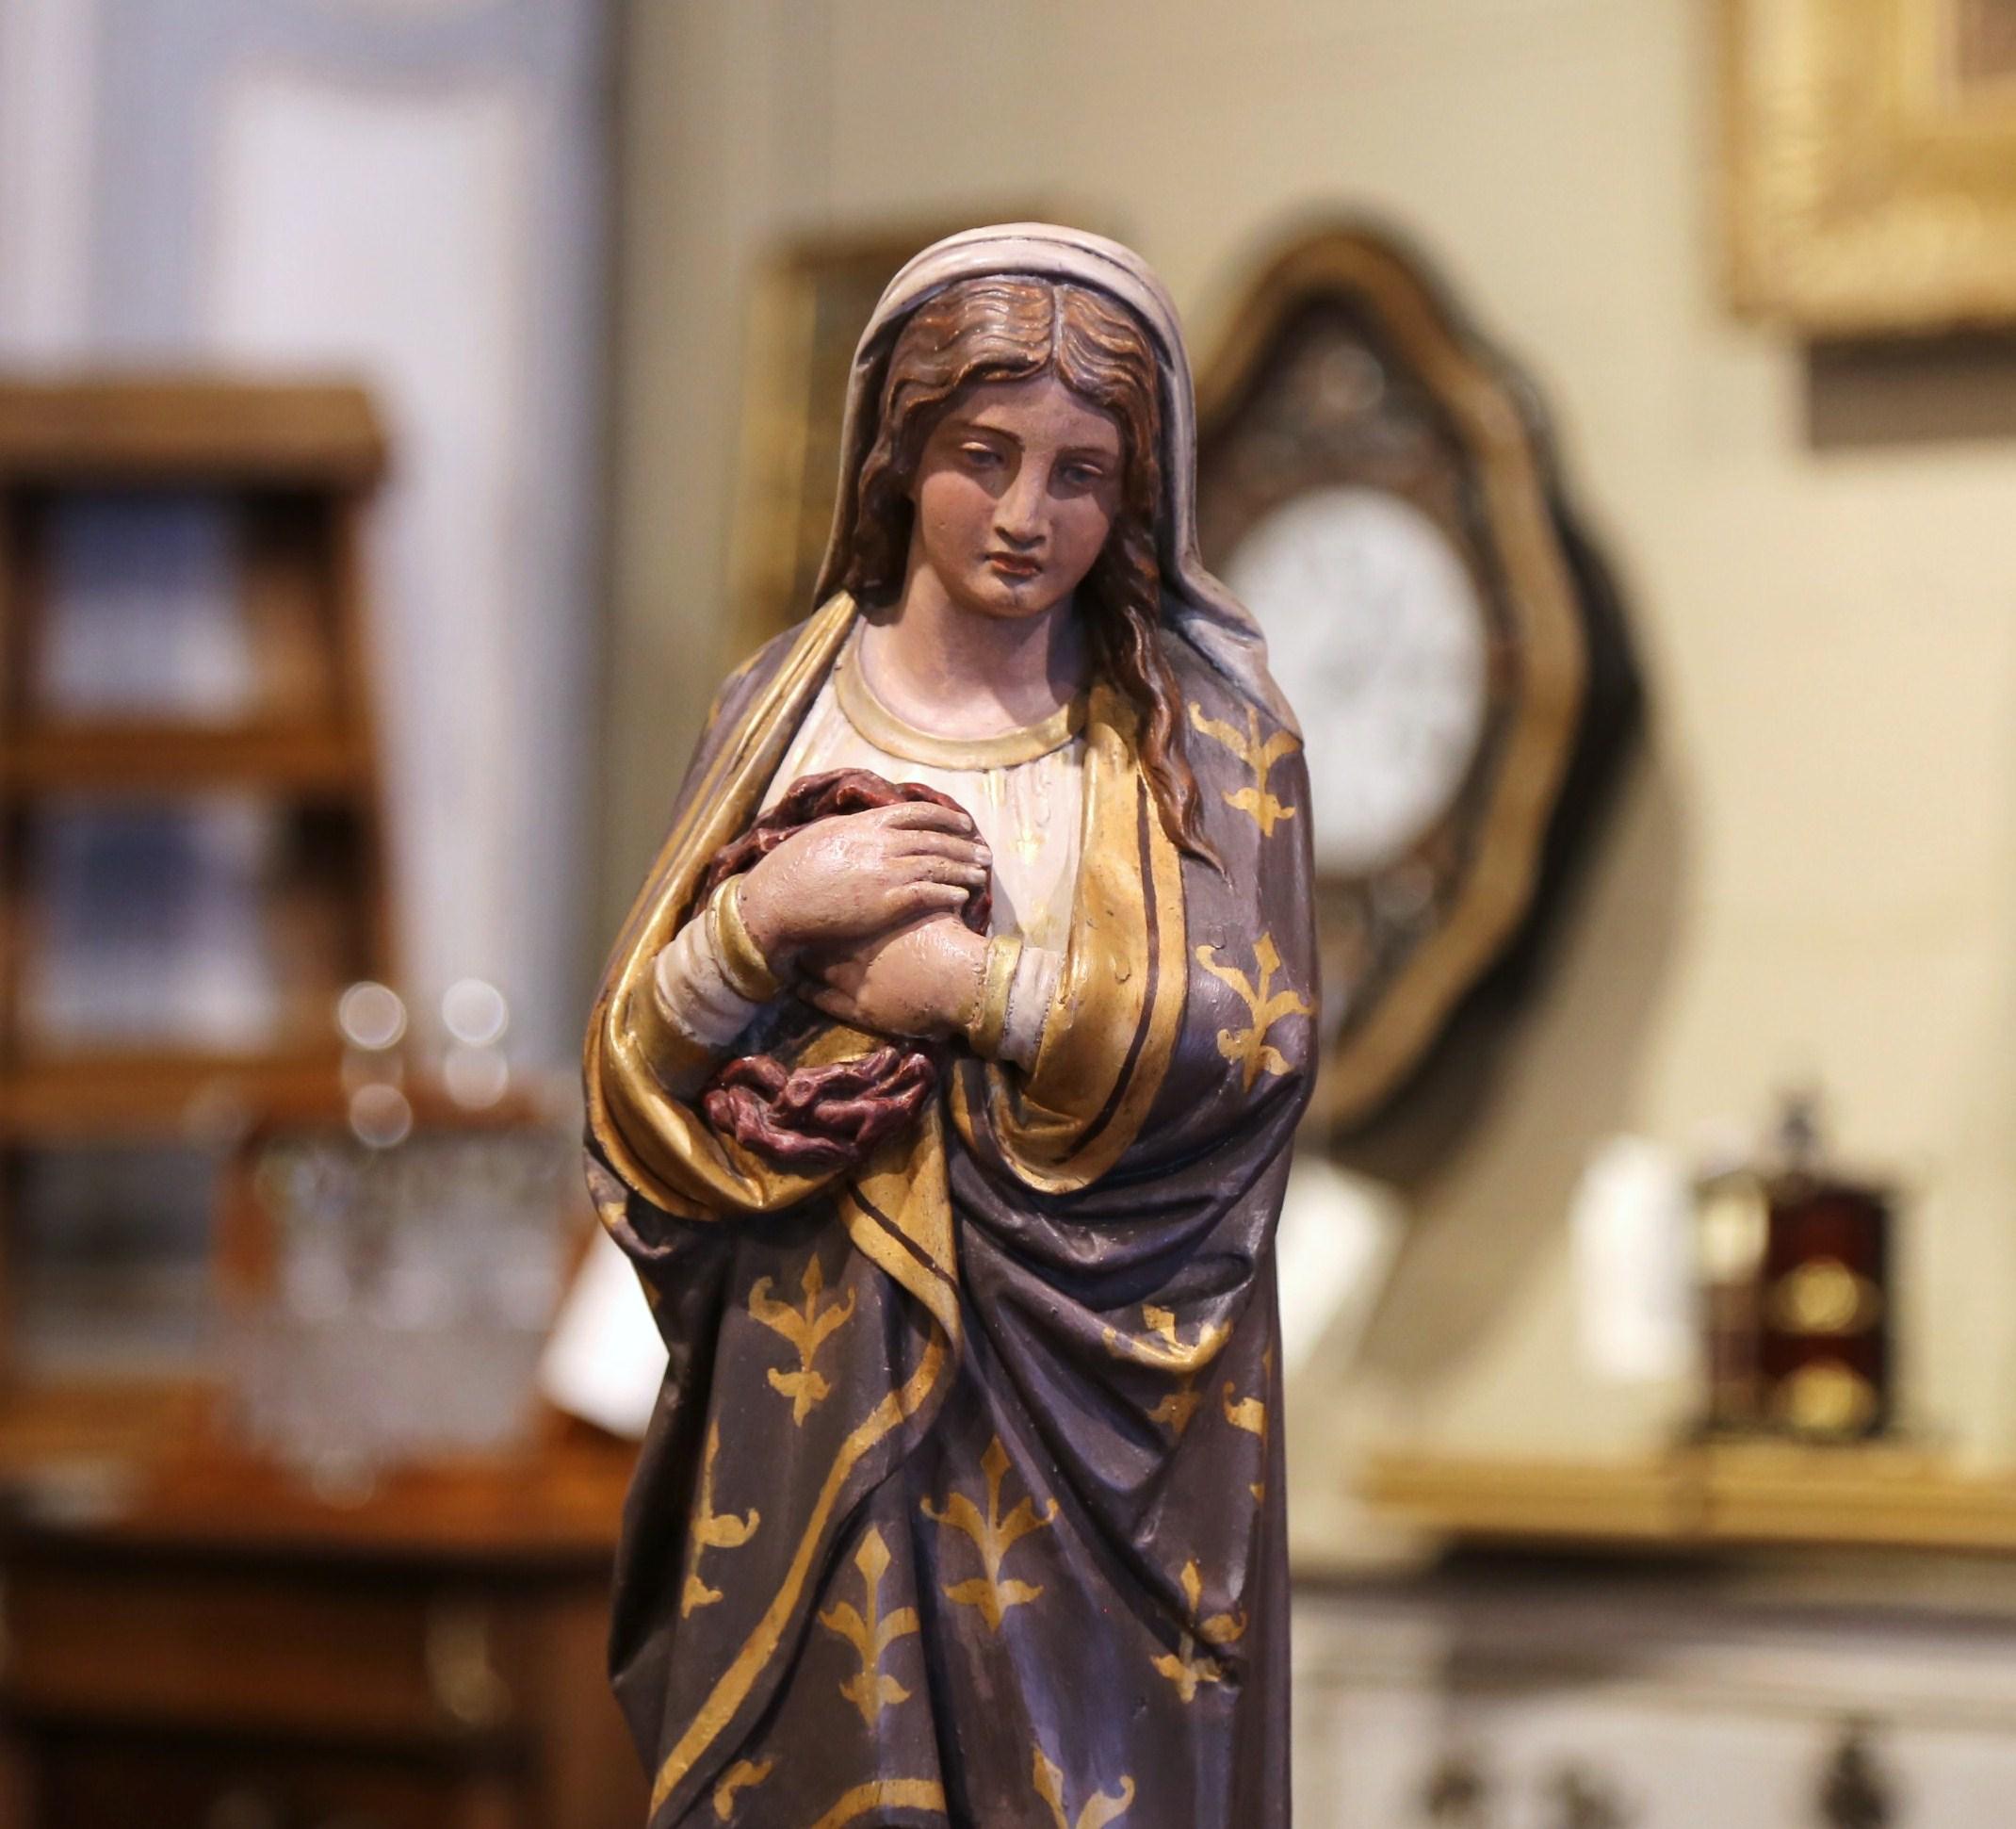 This beautiful, antique sculpture of the Virgin Mary was created in Provence, France, circa 1870. Embellished with gold leaf and polychrome finish, including floral motifs, the Classic figure is beautifully ornate and has wonderful details